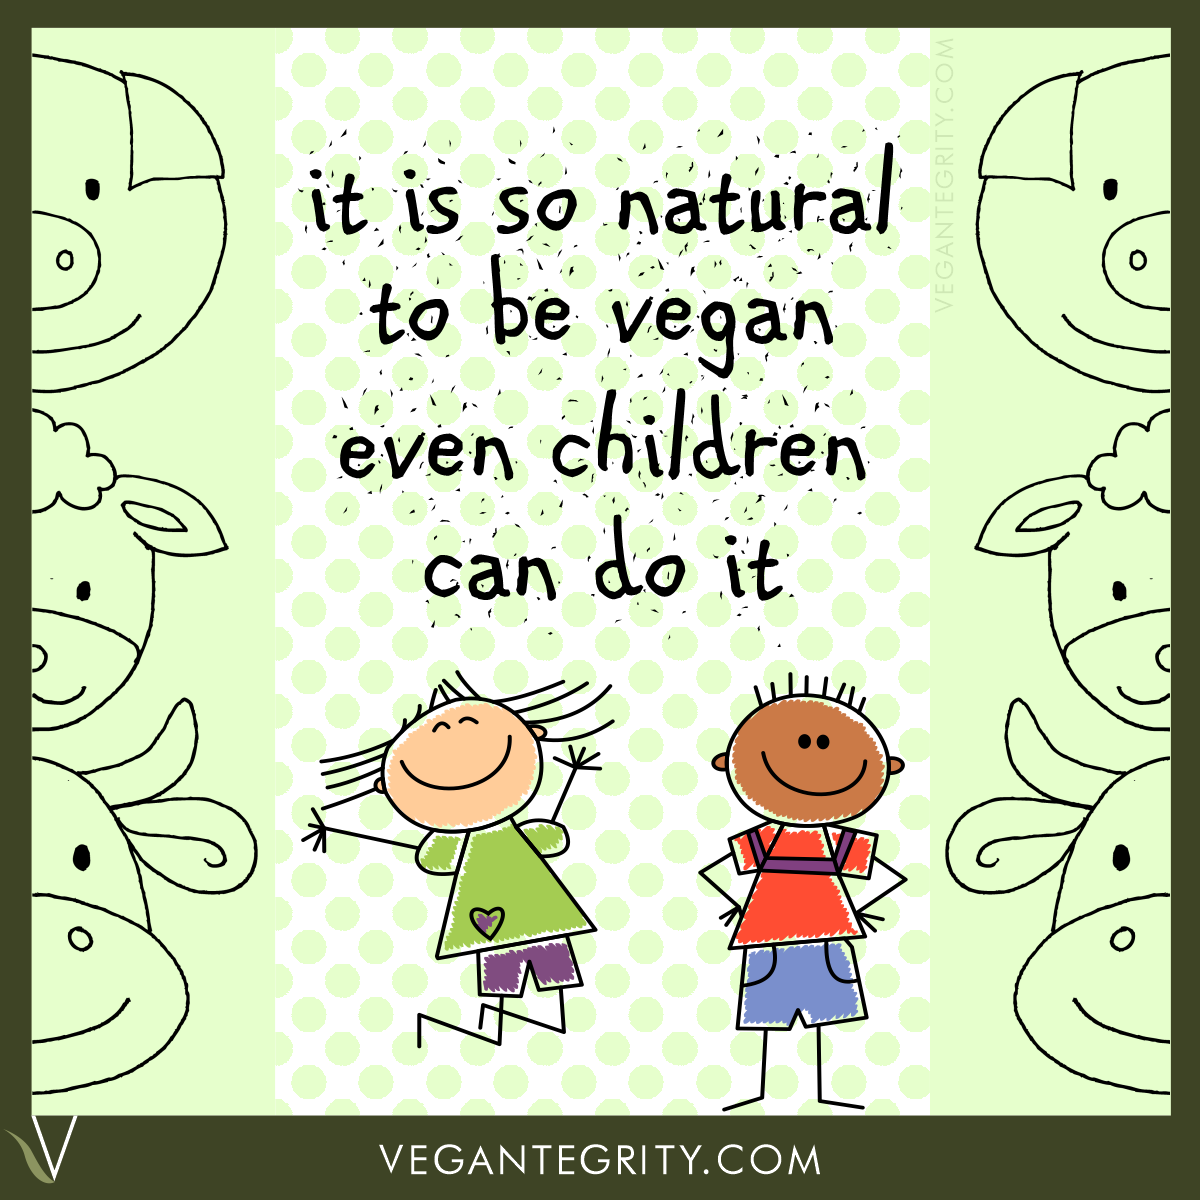 It is so natural to be vegan even children can do it. Stick figure drawings of pig, sheep, cow, happy boy and jumping girl on mint green and white polka dot background